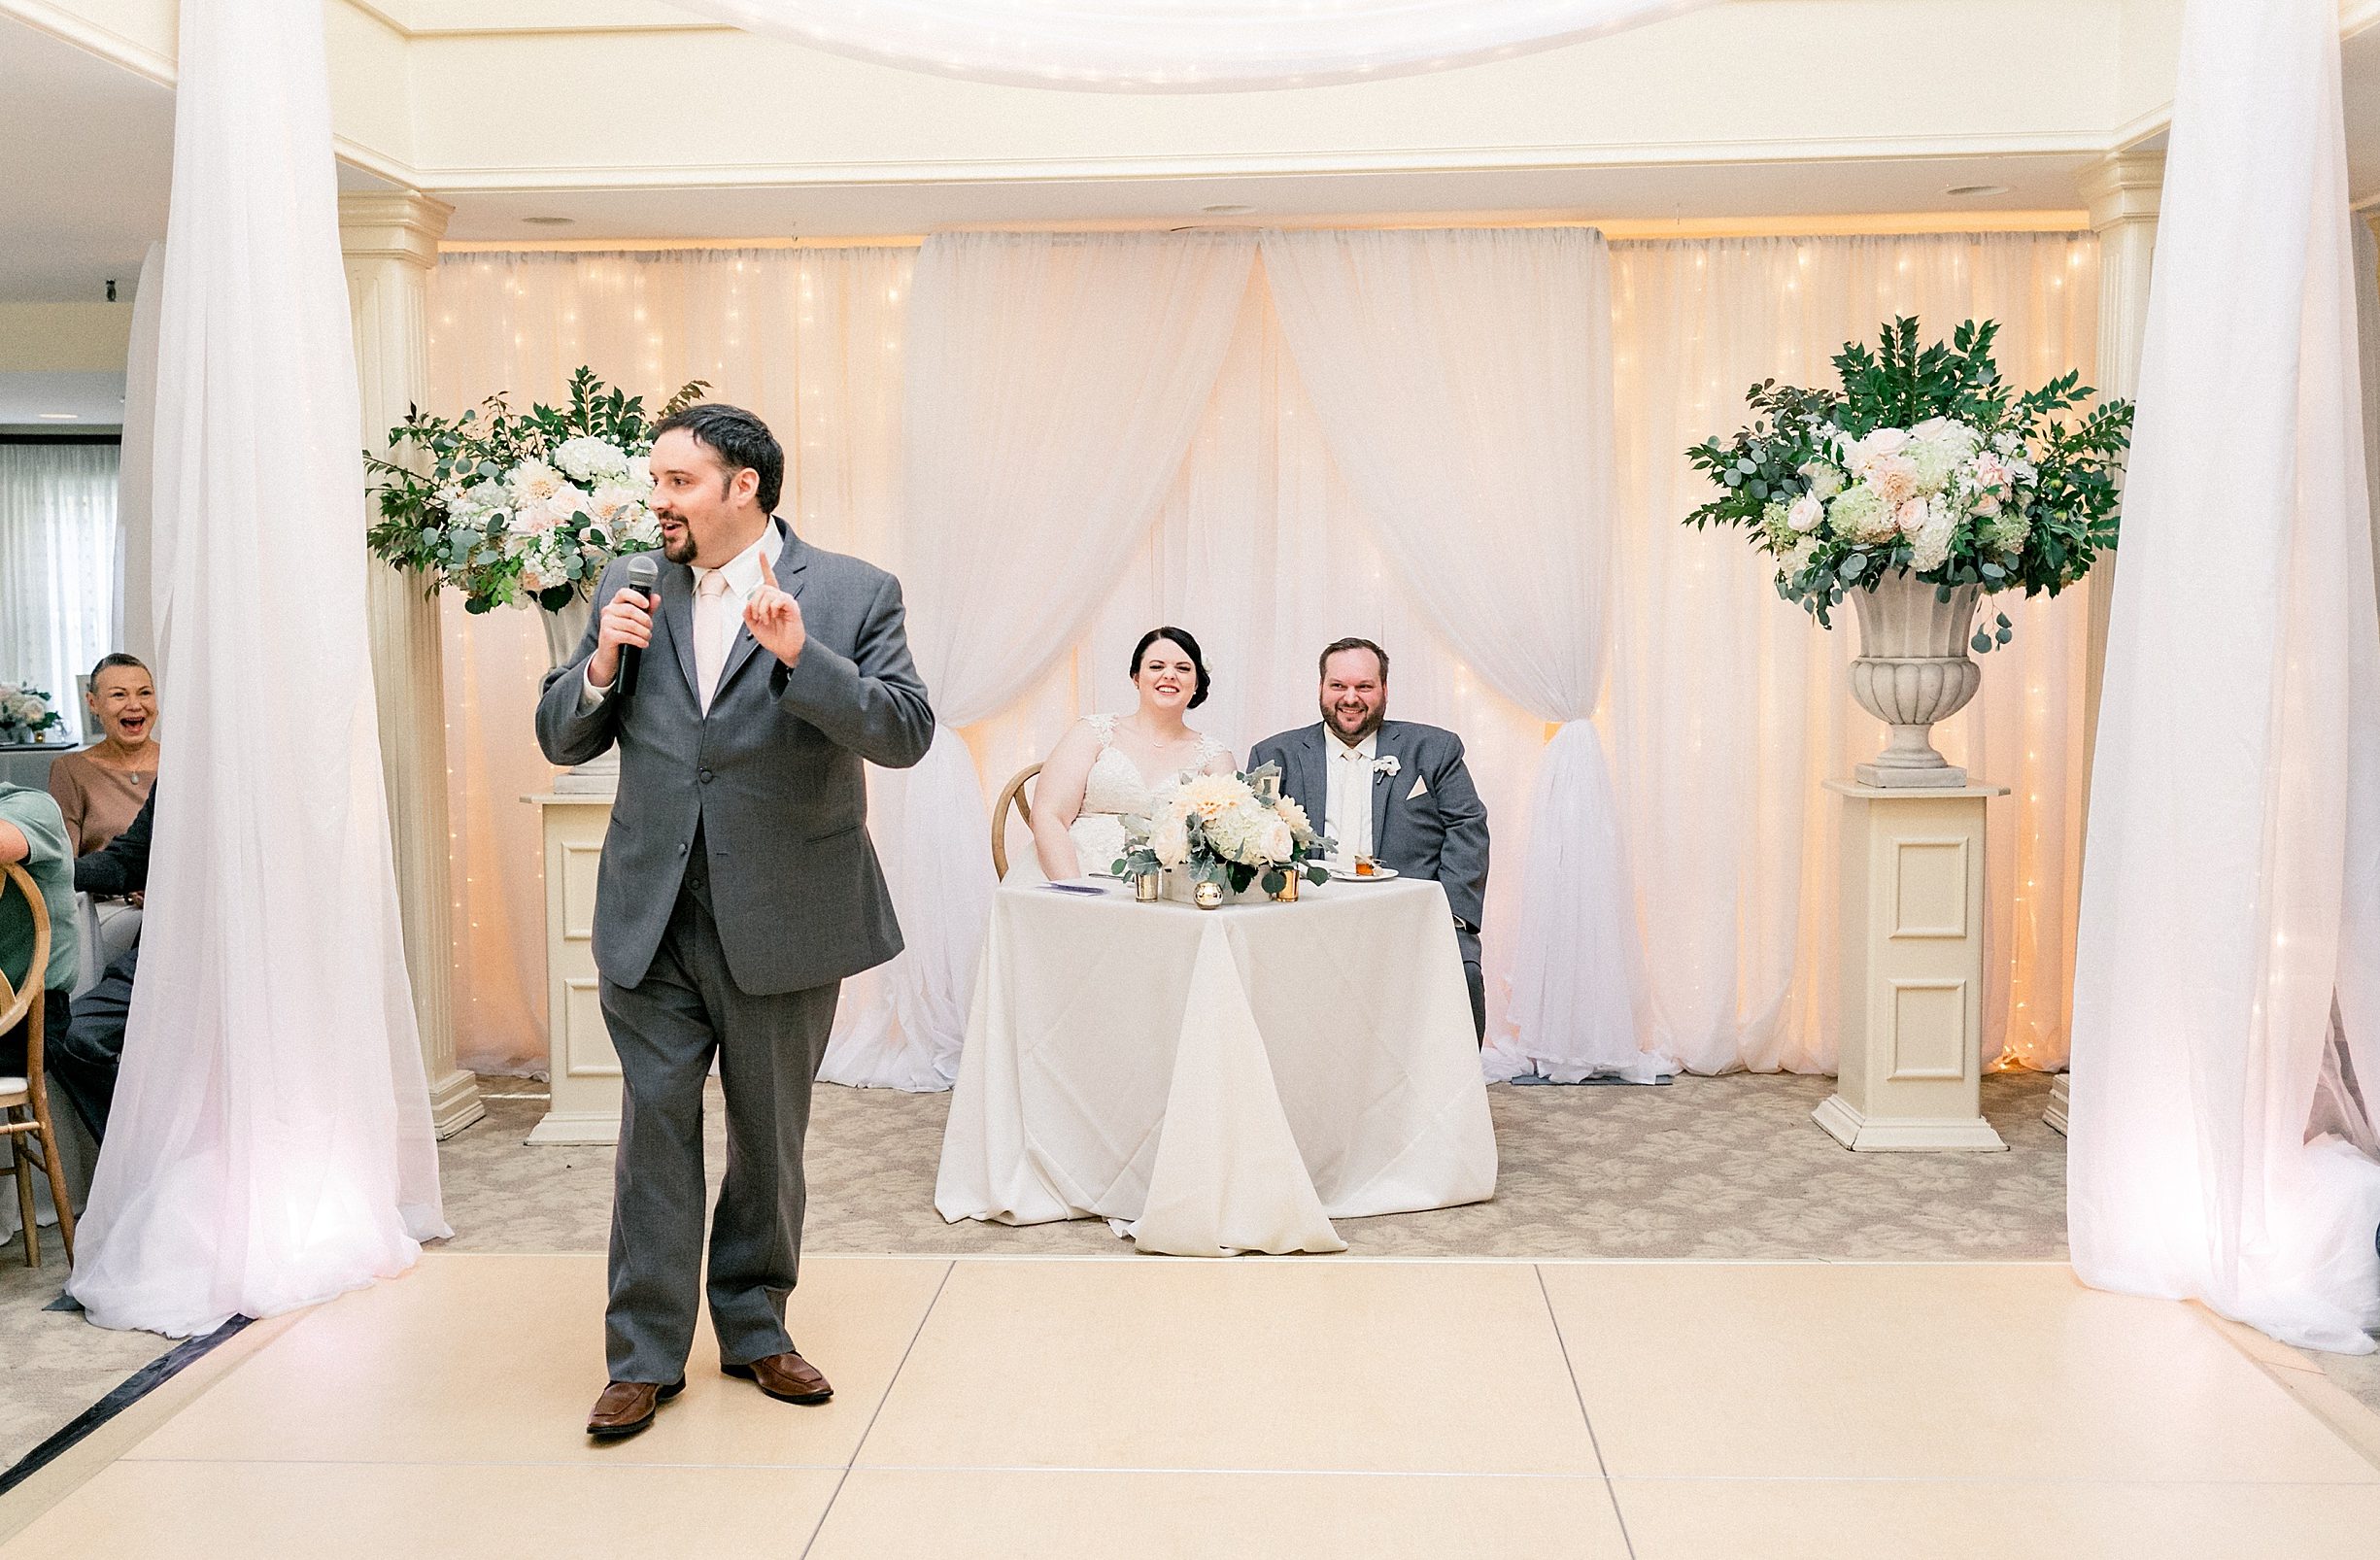 toasts to bride and groom at york harbor inn wedding